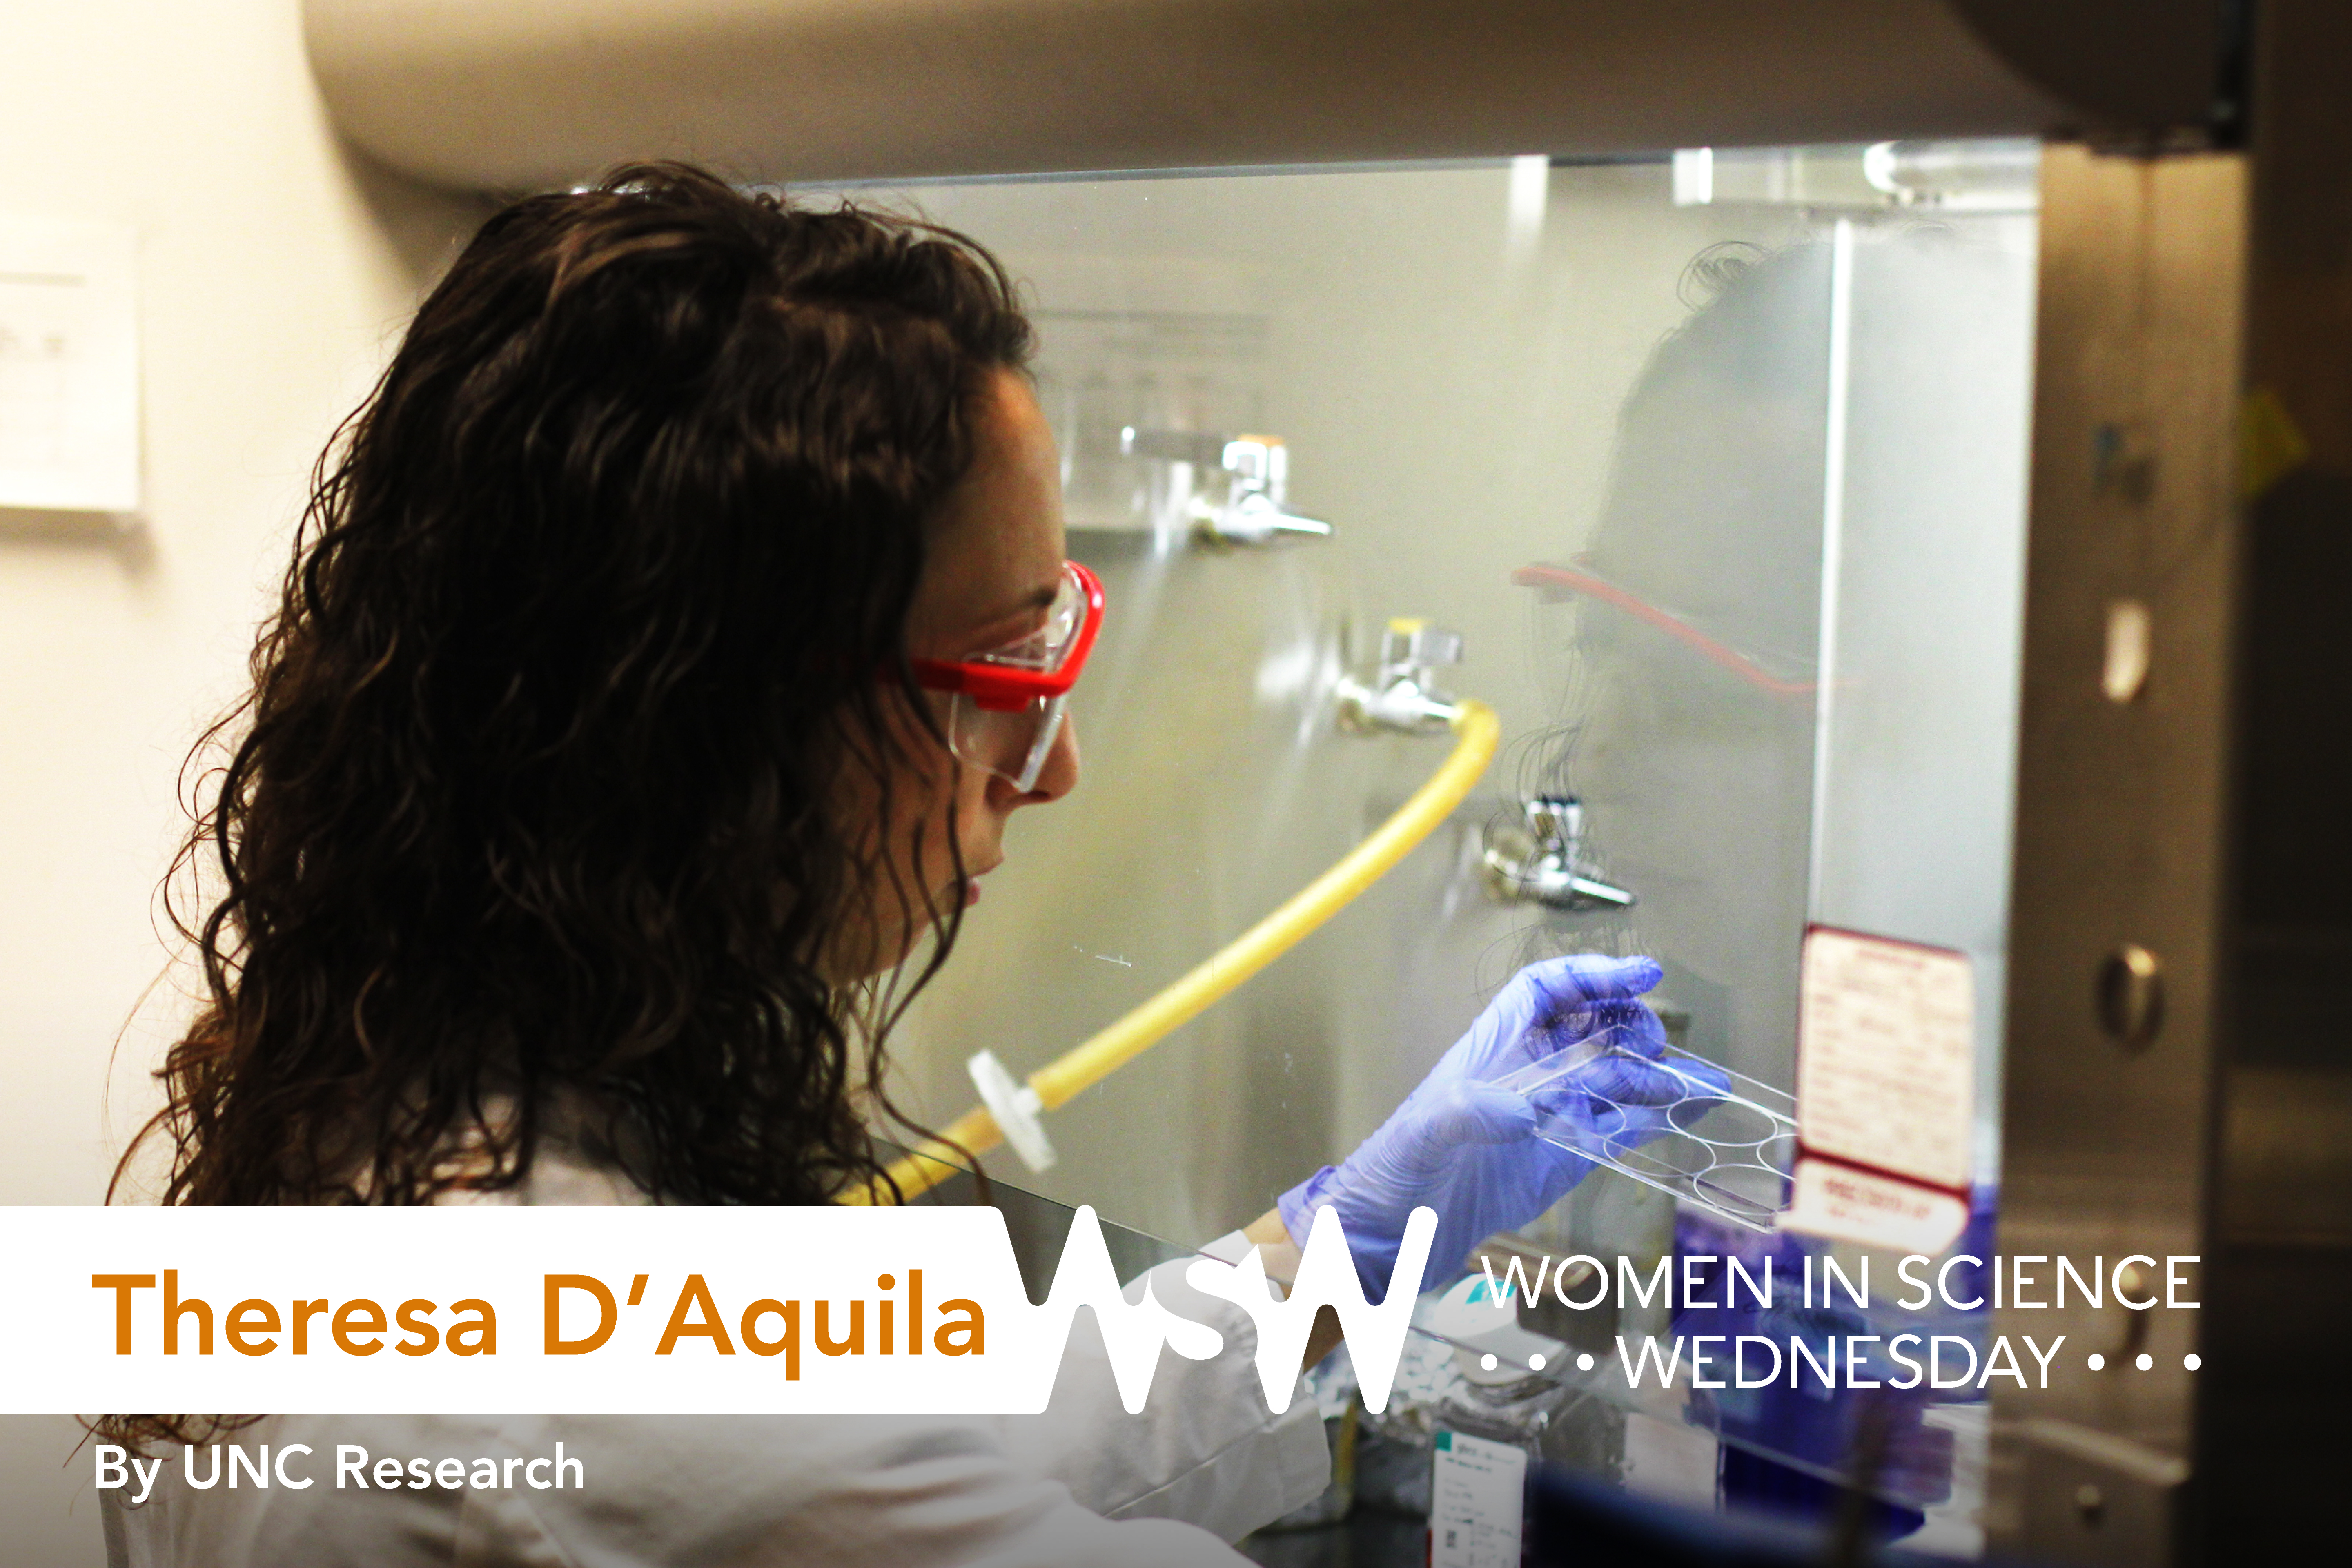 Theresa D'Aquila, wearing protective glasses, a lab coat, and gloves, working in the lab.